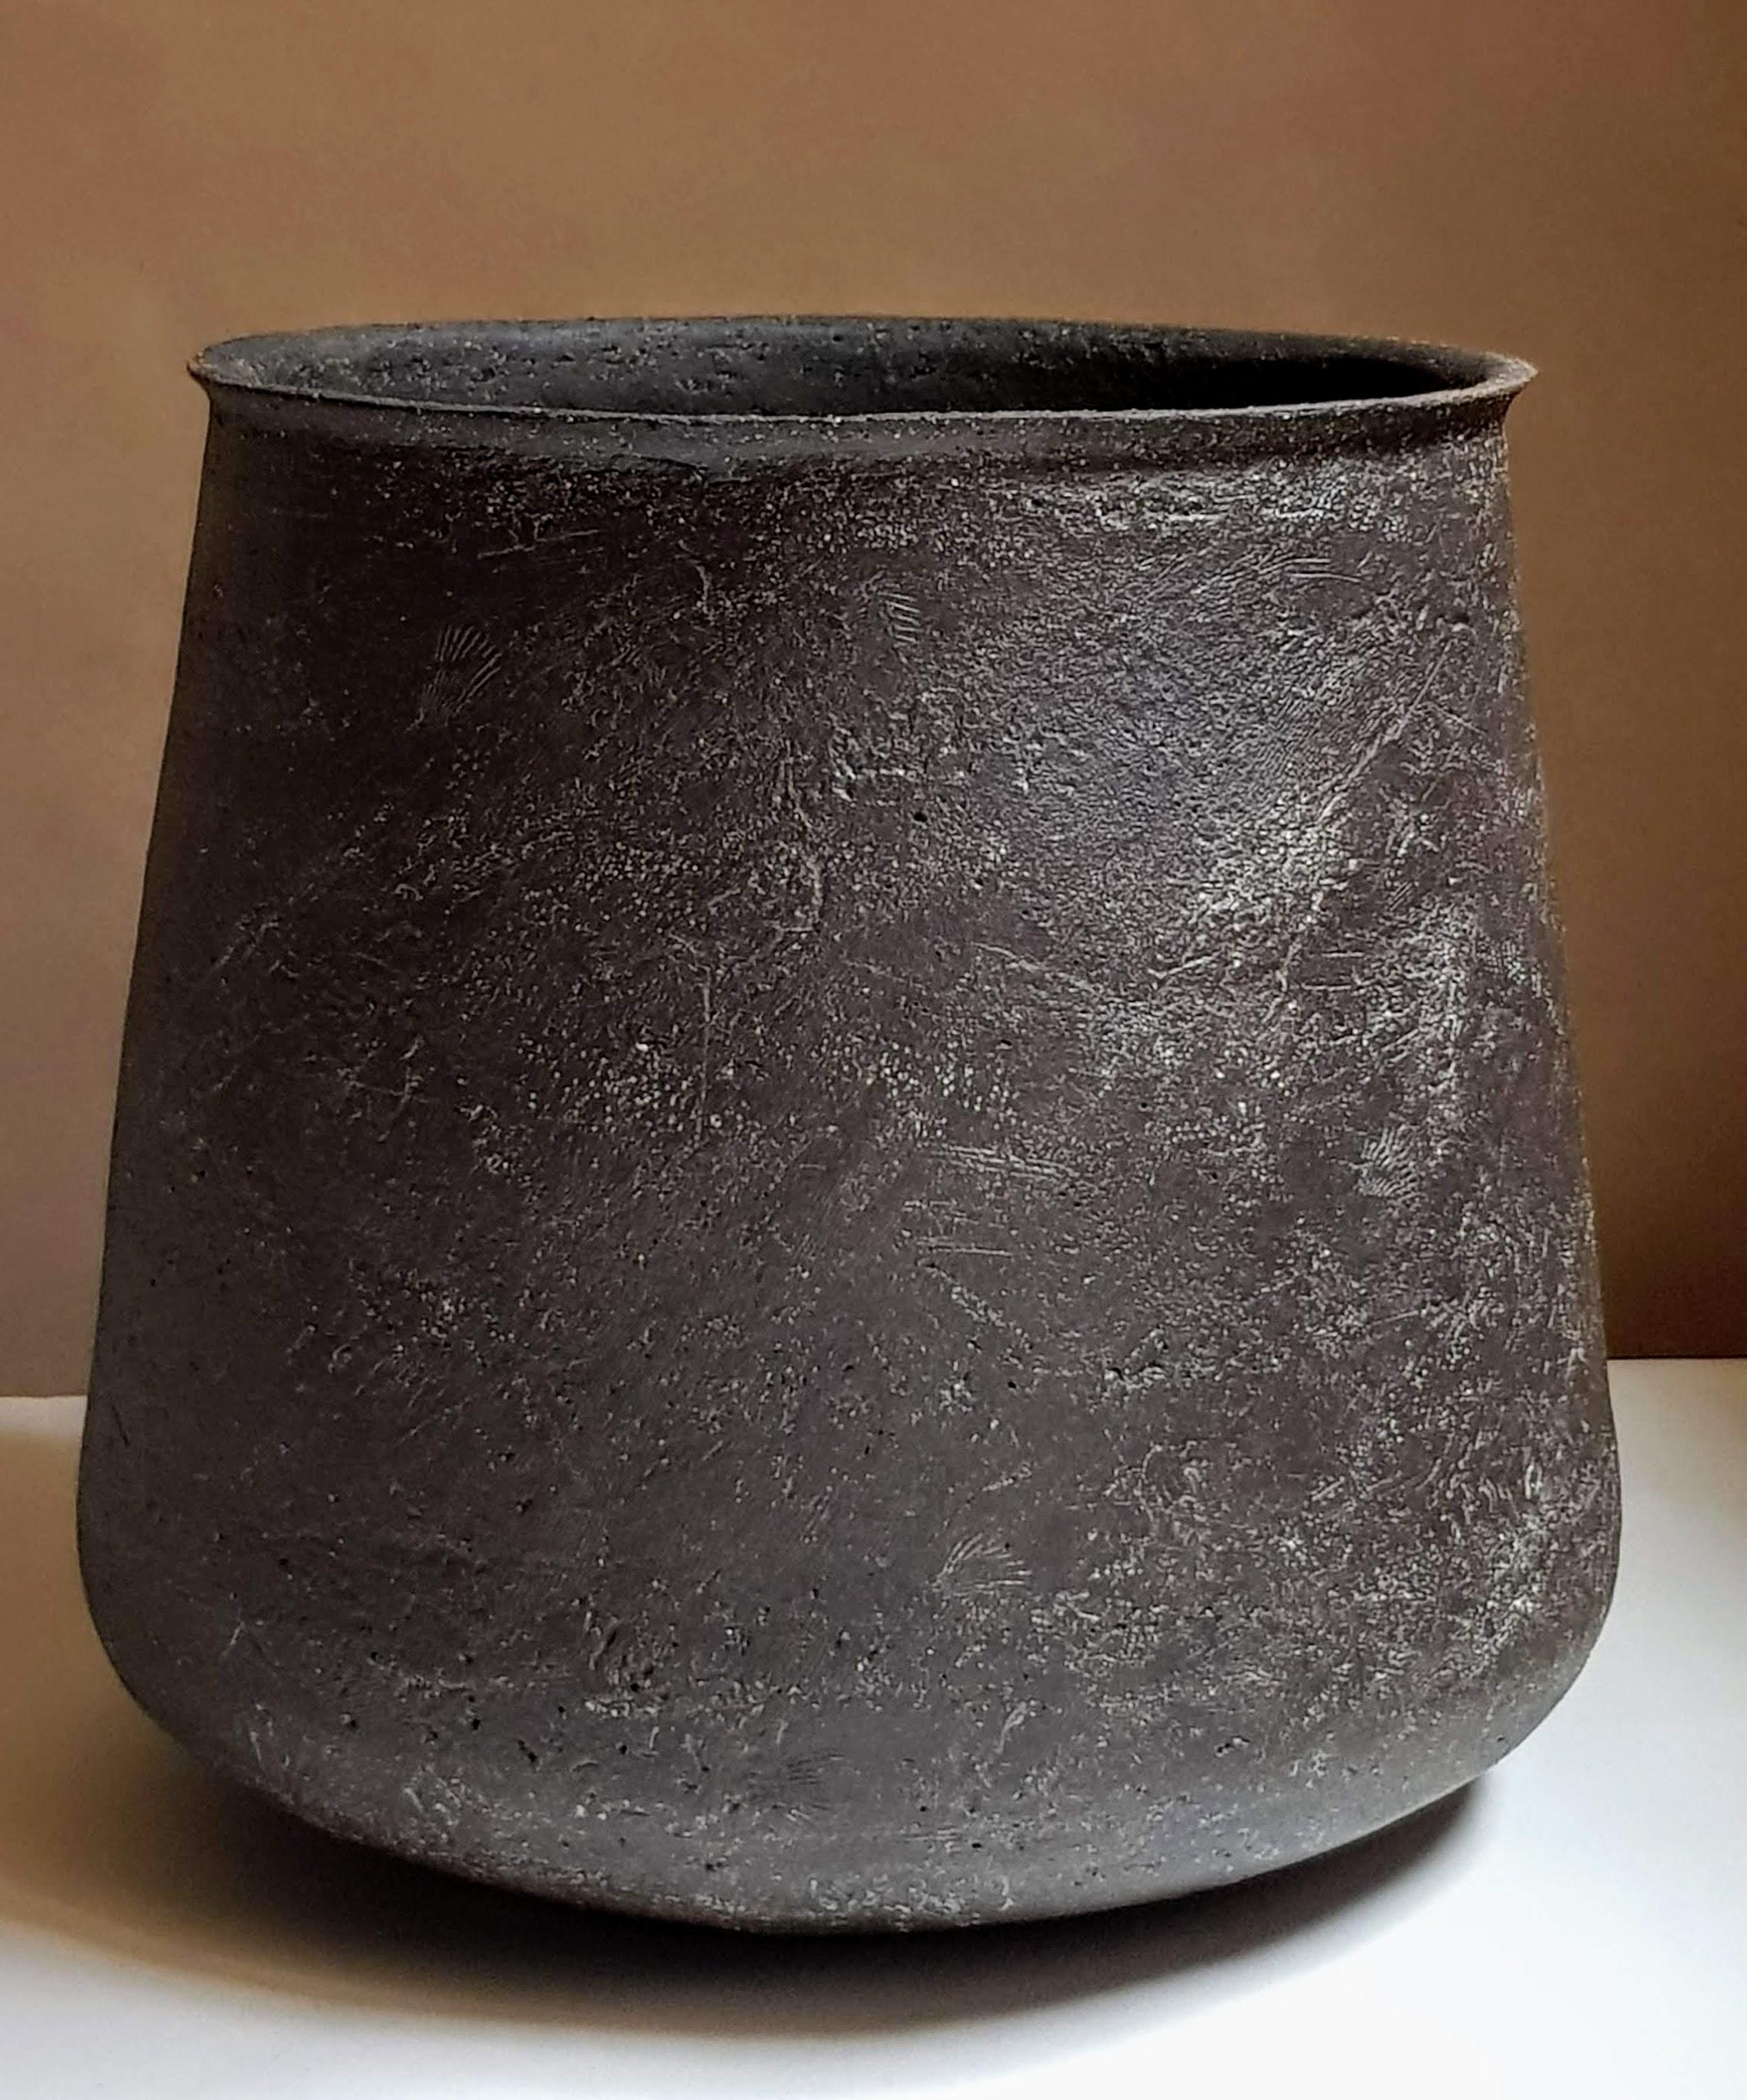 Black Stoneware Kalathos Vase by Elena Vasilantonaki
Unique
Dimensions: ⌀ 20 x H 23 cm (Dimensions may vary)
Materials: Stoneware
Available finishes: Black, White, Brown, Red, White Patina

Growing up in Greece I was surrounded by pottery forms that